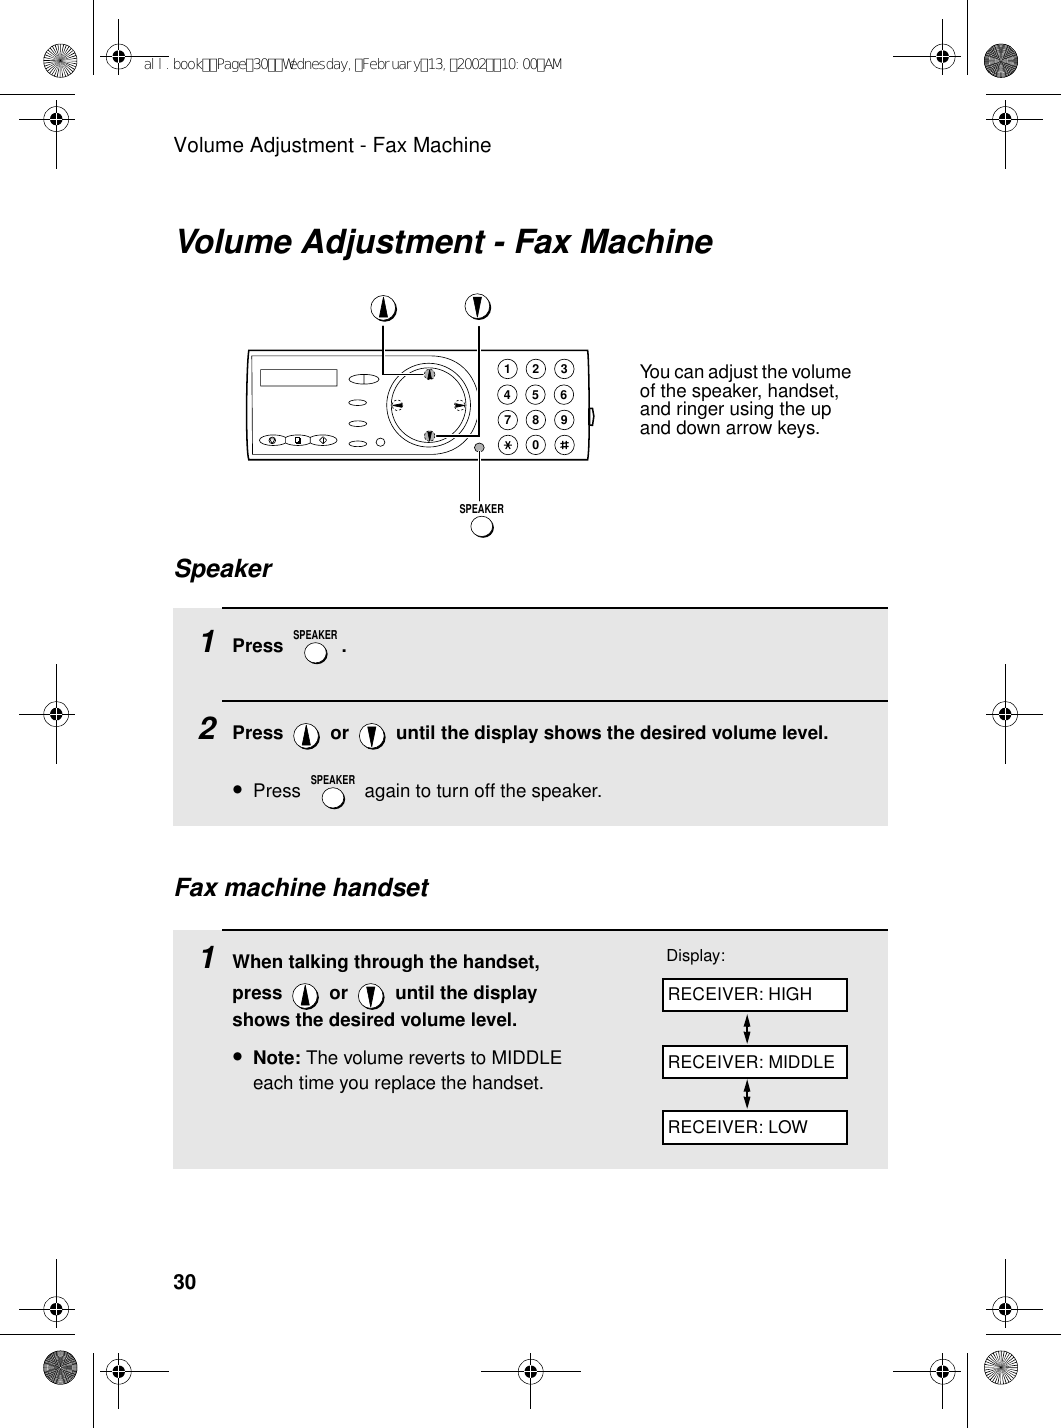 Volume Adjustment - Fax Machine30Volume Adjustment - Fax Machine1Press .2Press   or   until the display shows the desired volume level. •Press   again to turn off the speaker.SPEAKERSPEAKERSpeaker1945 67802 3SPEAKER1When talking through the handset, press   or   until the display shows the desired volume level.•Note: The volume reverts to MIDDLE each time you replace the handset.Display:Fax machine handsetRECEIVER: HIGHRECEIVER: MIDDLERECEIVER: LOWYou can adjust the volume of the speaker, handset, and ringer using the up and down arrow keys.all.bookPage30Wednesday,February13,200210:00AM